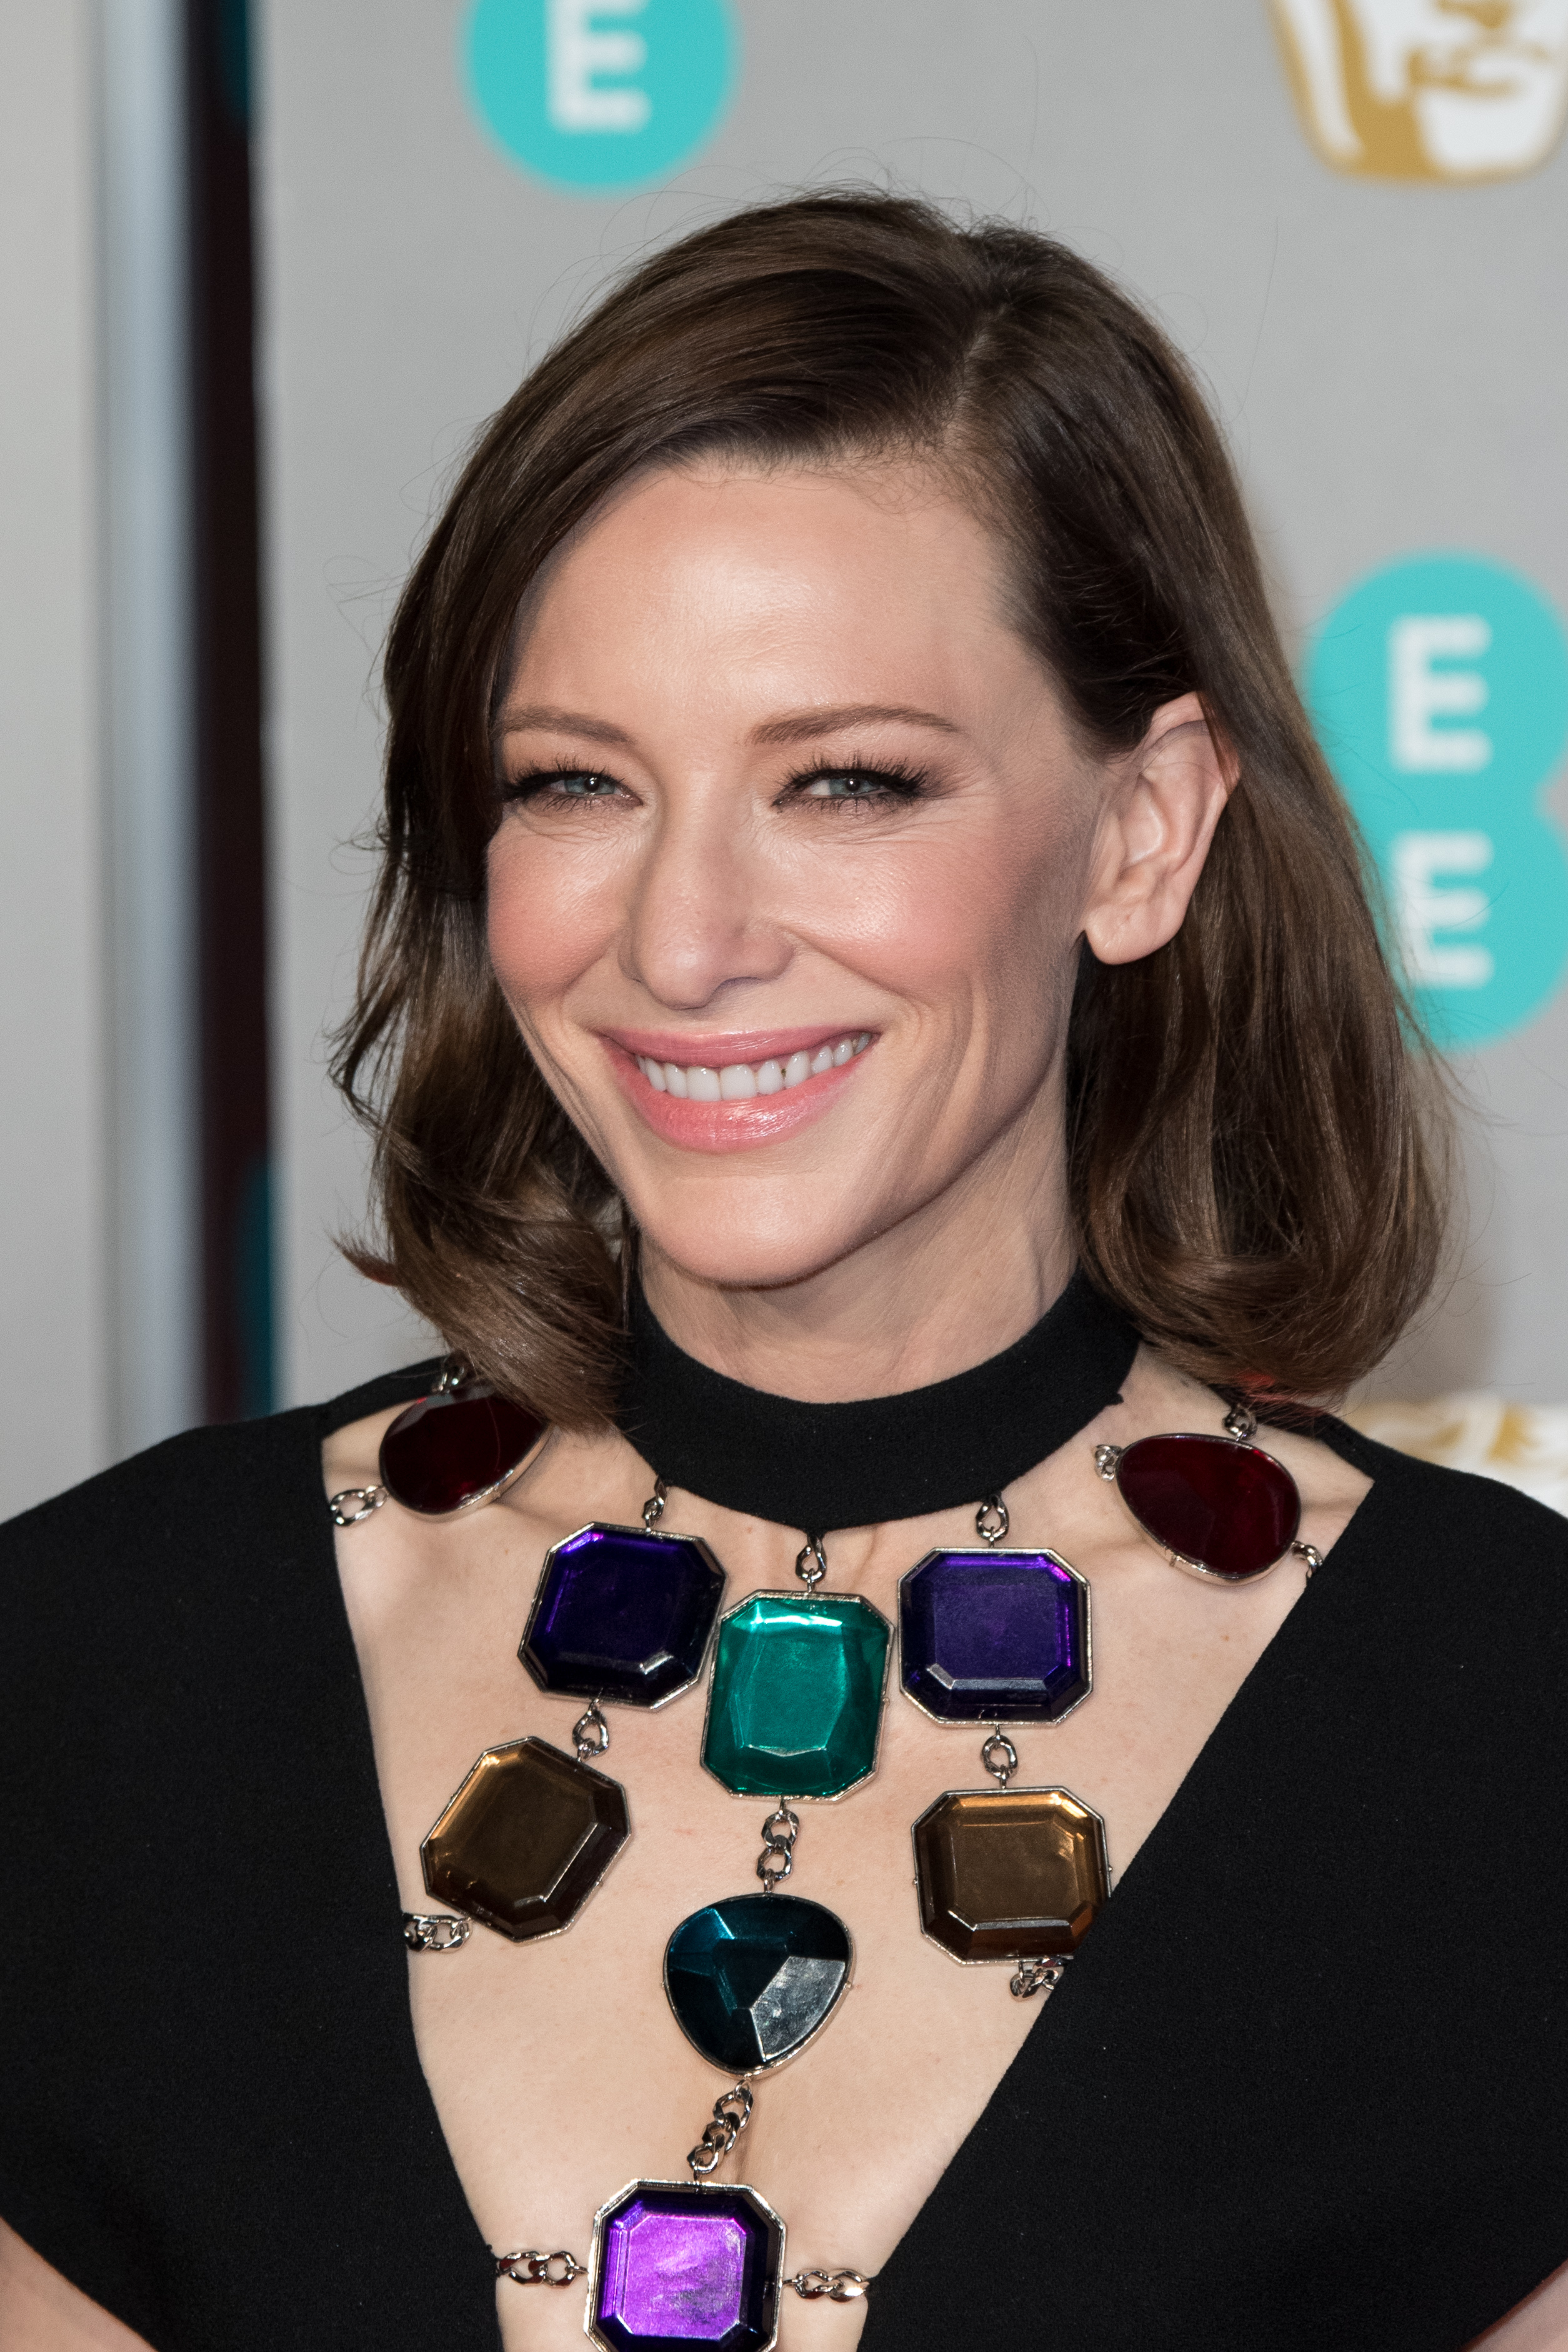 Cate Blanchett attends the EE British Academy Film Awards on February 10, 2019 in London, England | Source: Getty Images